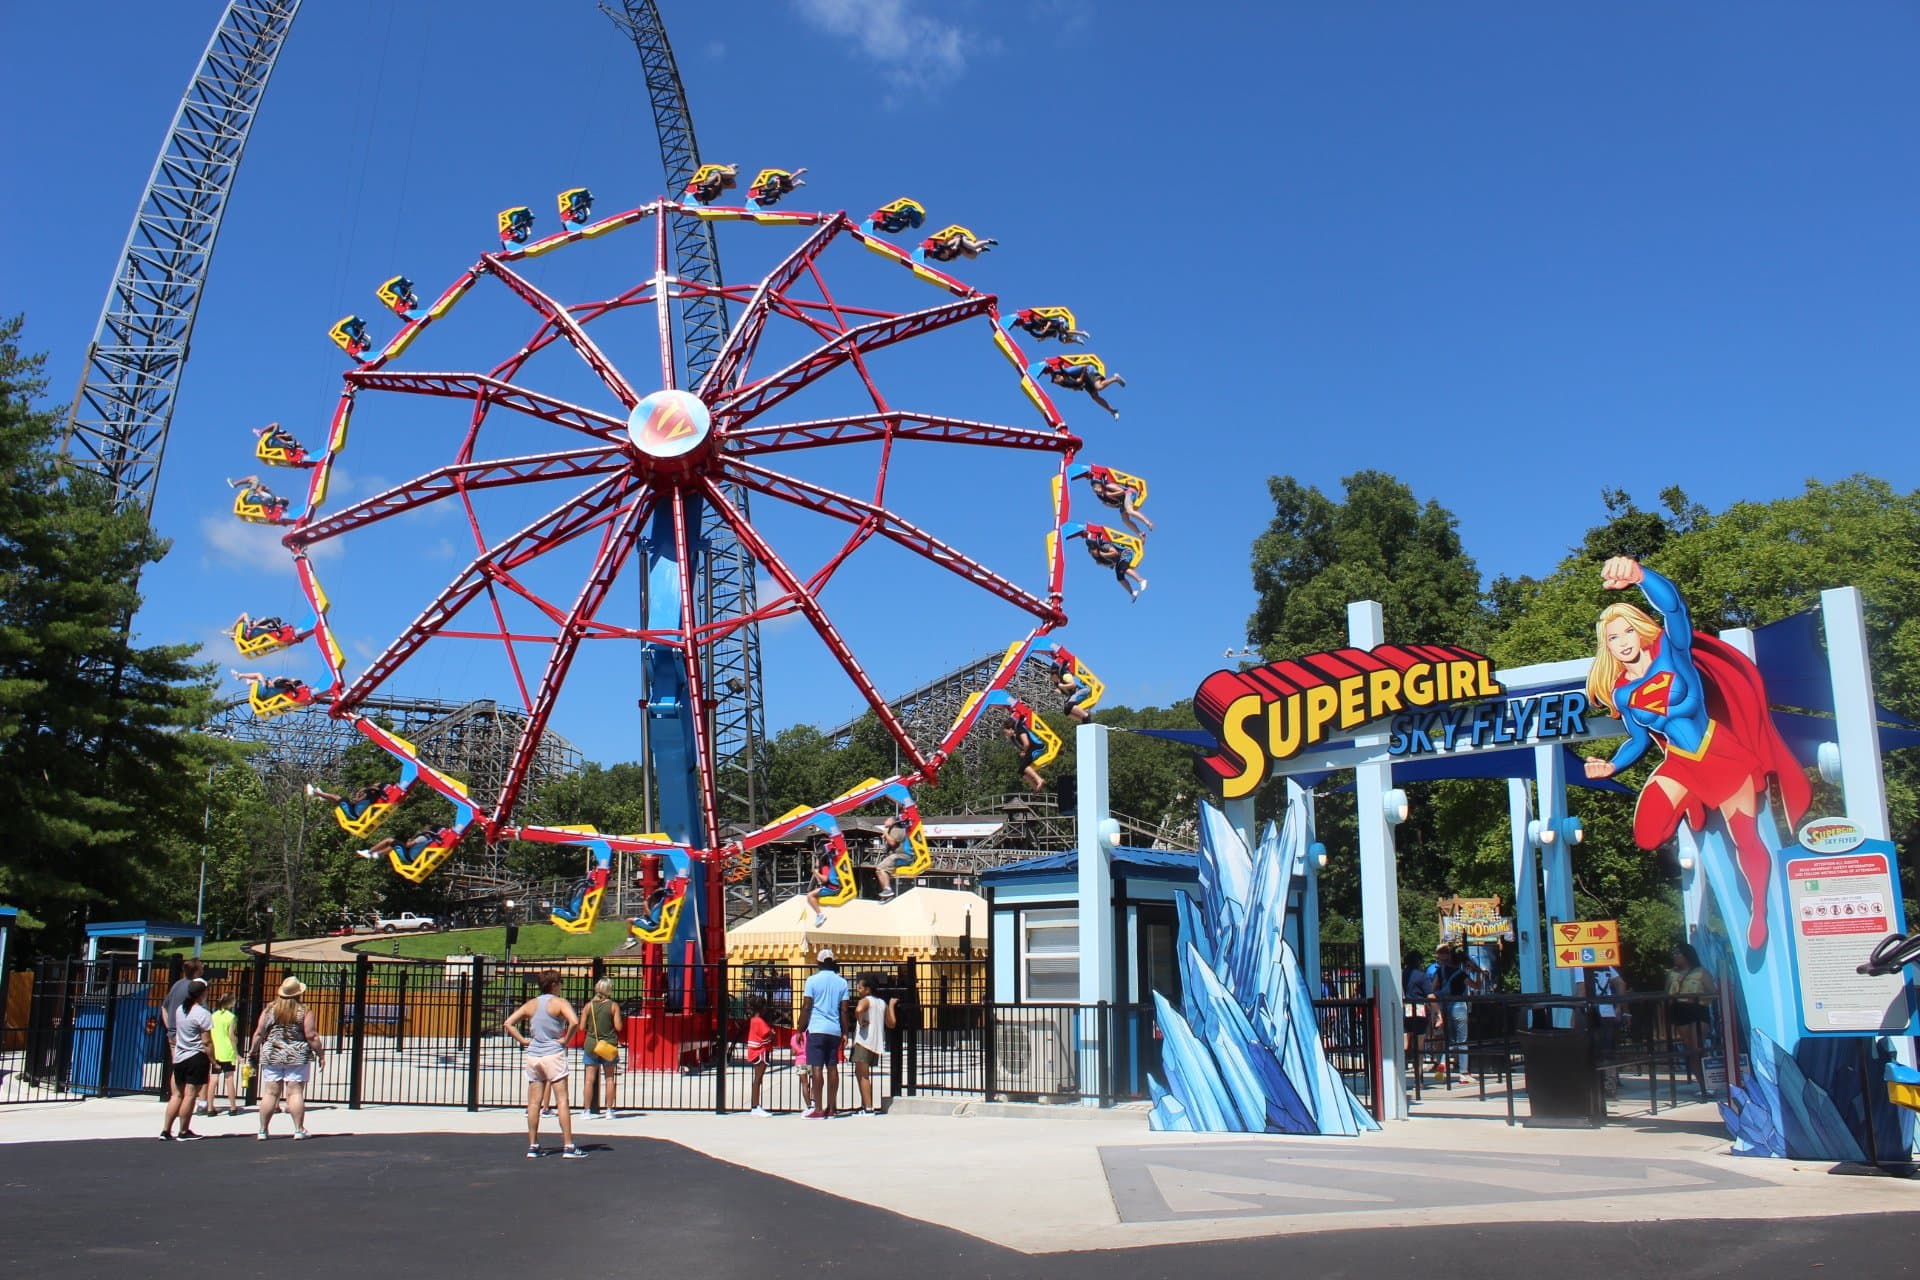 Thrill seekers will ride solo on the new Supergirl Sky Flyer. (Courtesy Six Flags New England)